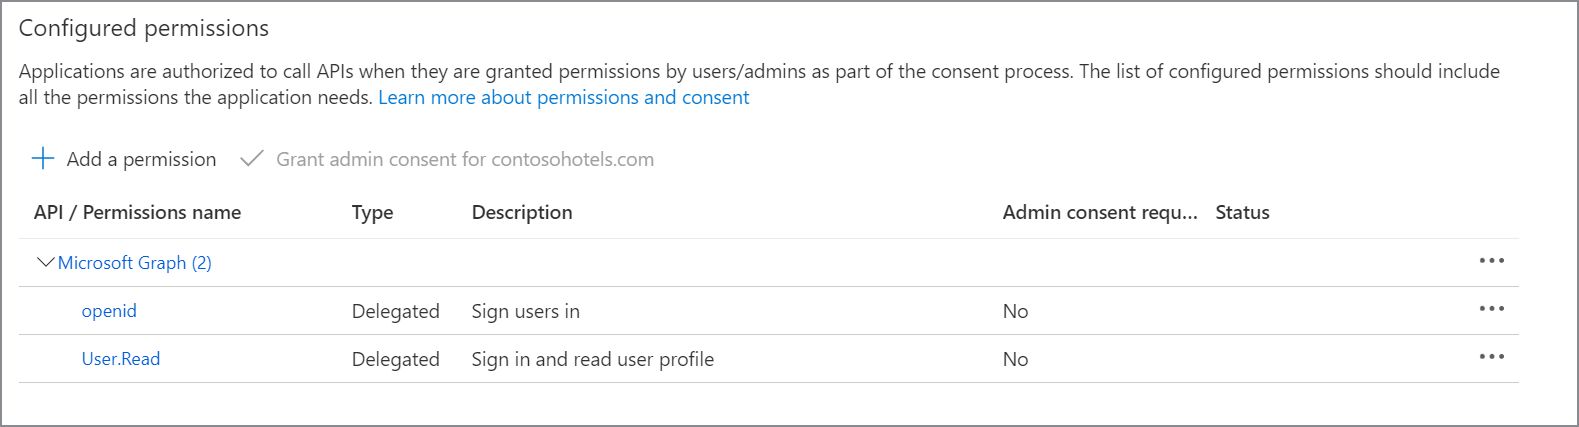 Screenshot of delegated permissions on Microsoft Graph.